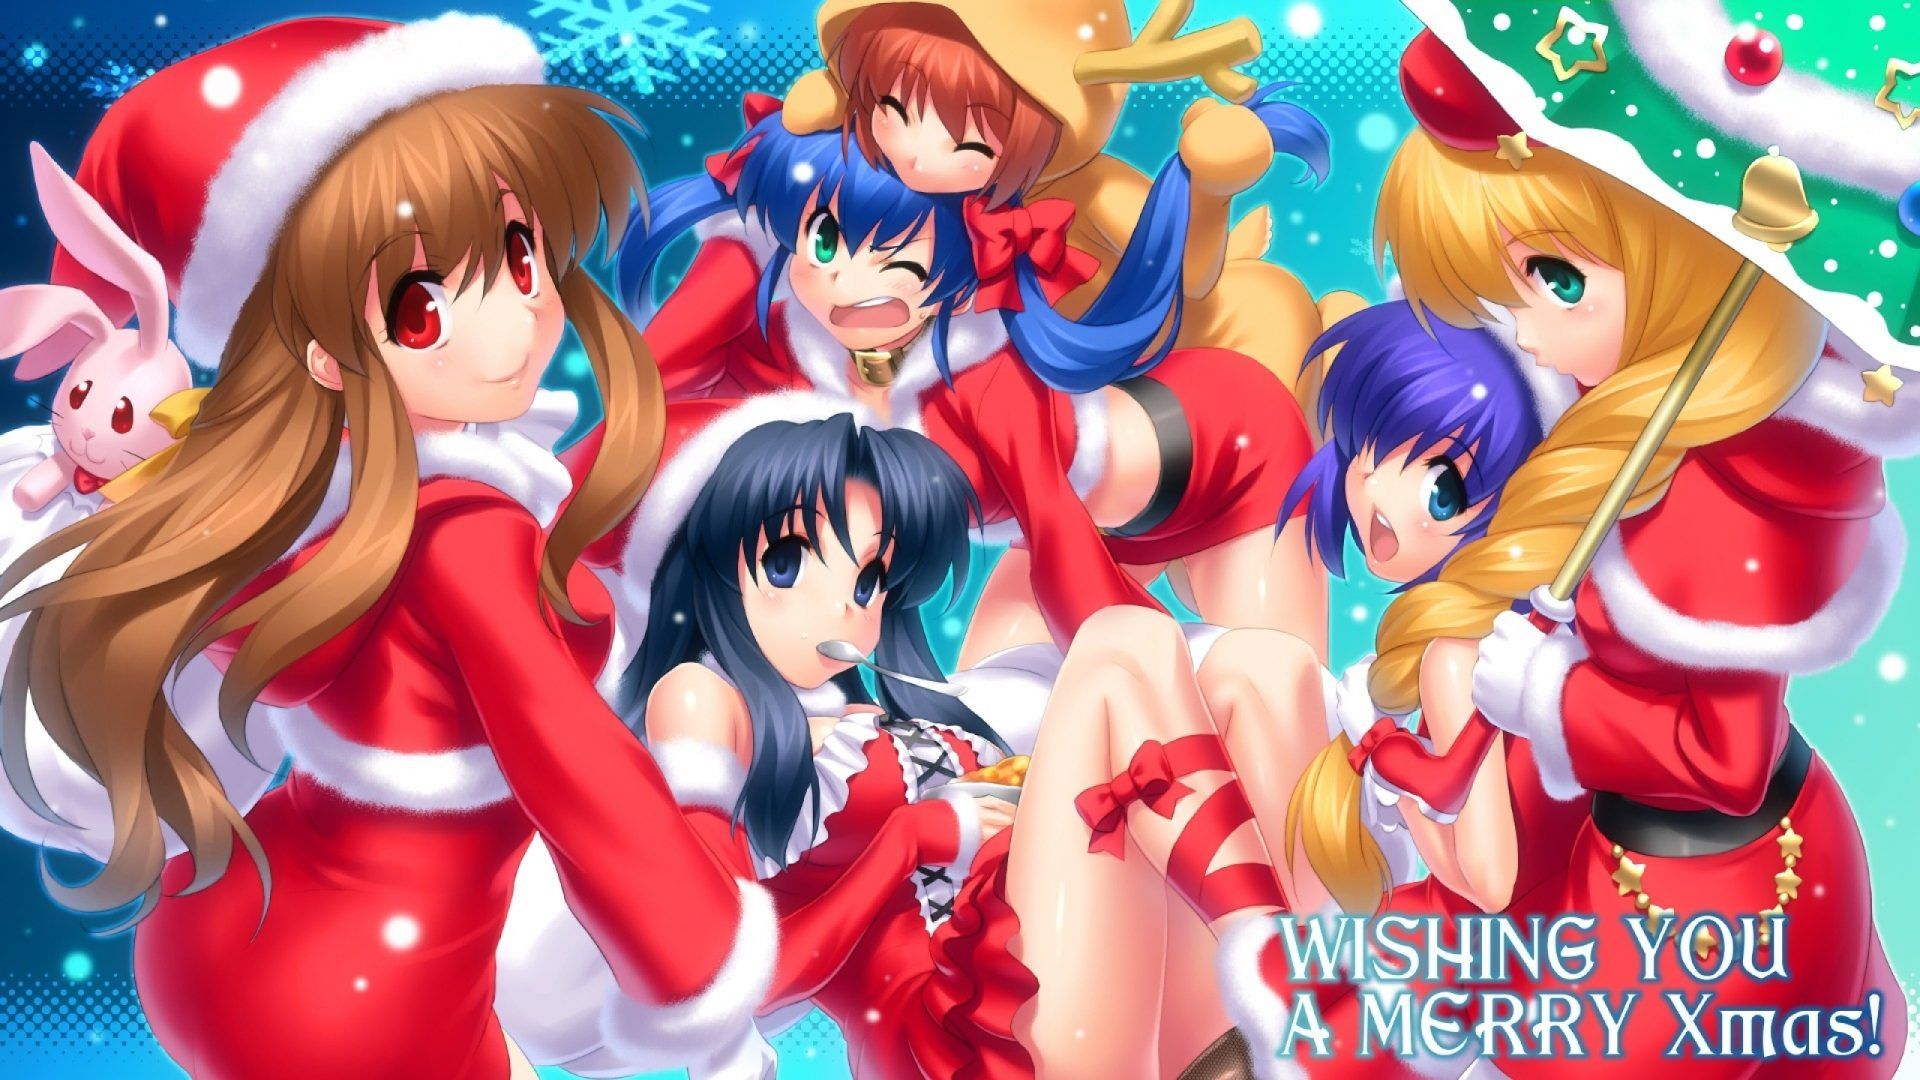 Christmas Girls With Blond Brown Hair Celebration Of Christmas And New Year Anime Christmas Picture Desktop HD Wallpaper 2560x1440, Wallpaper13.com